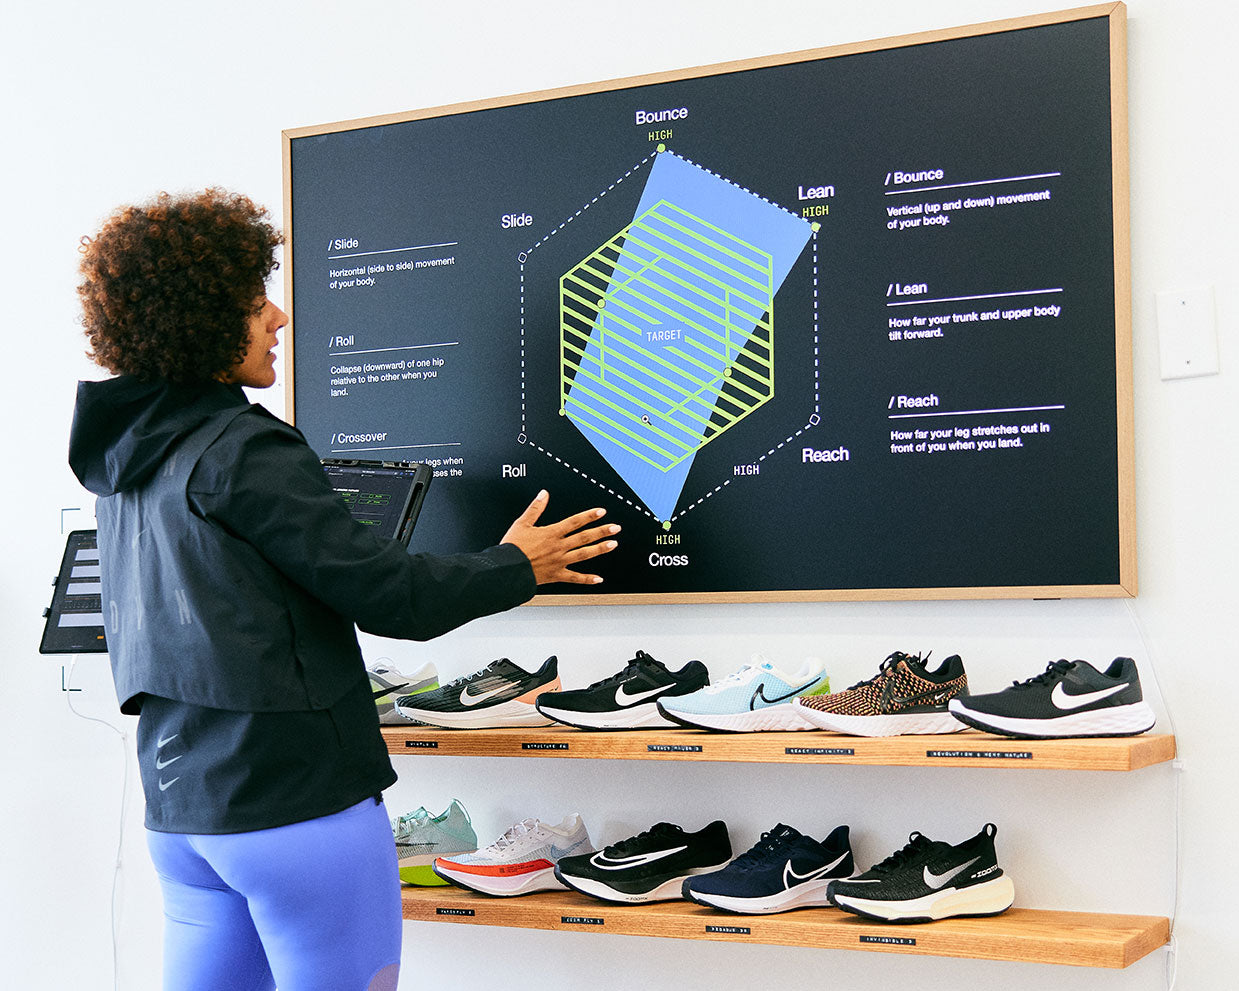 Nike's Sport Research Lab